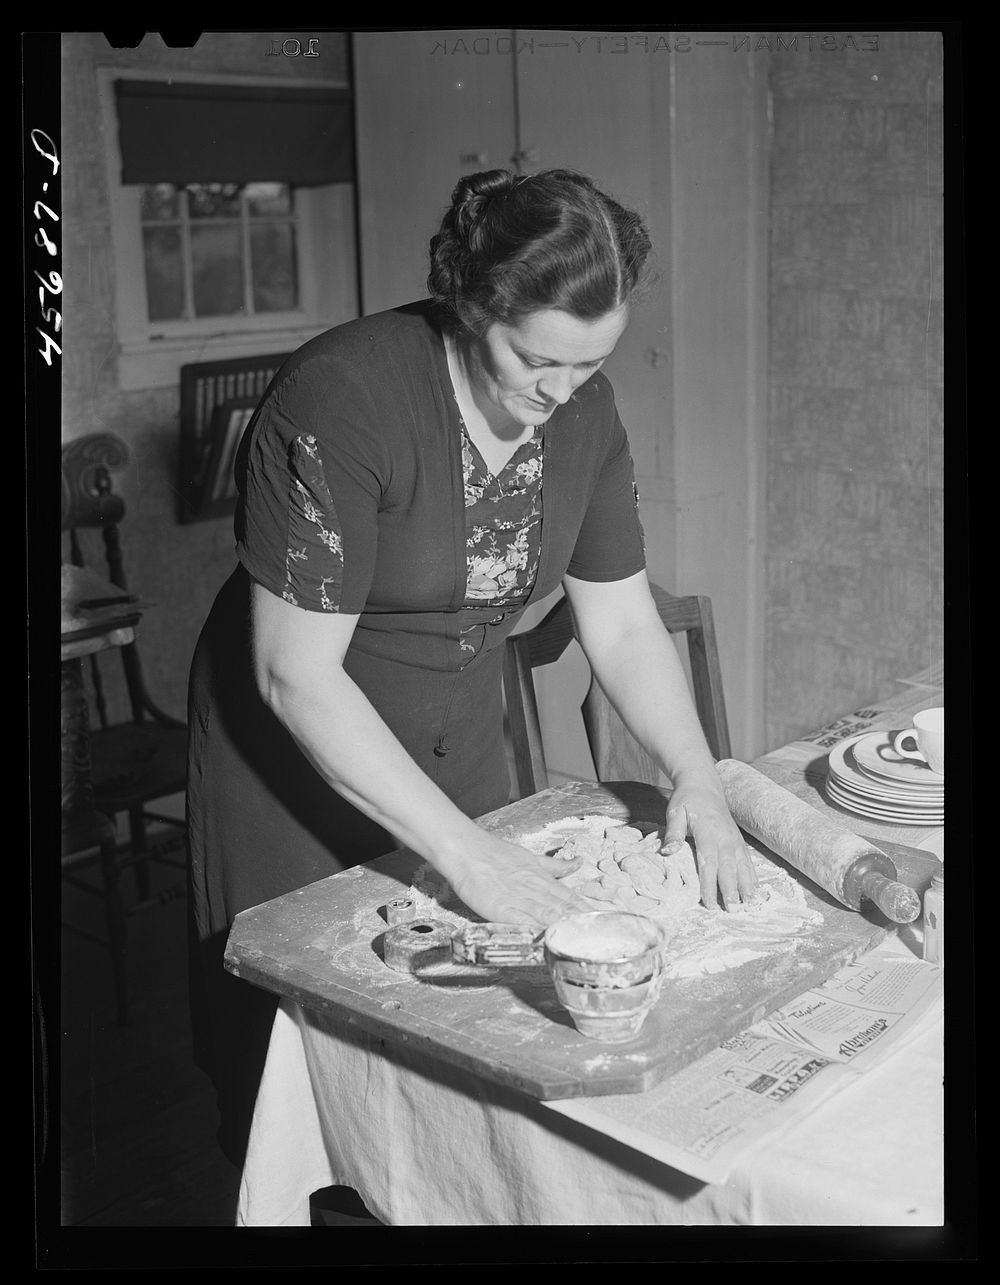 [Untitled photo, possibly related to: Mrs. W. Gaynor preparing dinner on their farm near Fairfield, Vermont]. Sourced from…